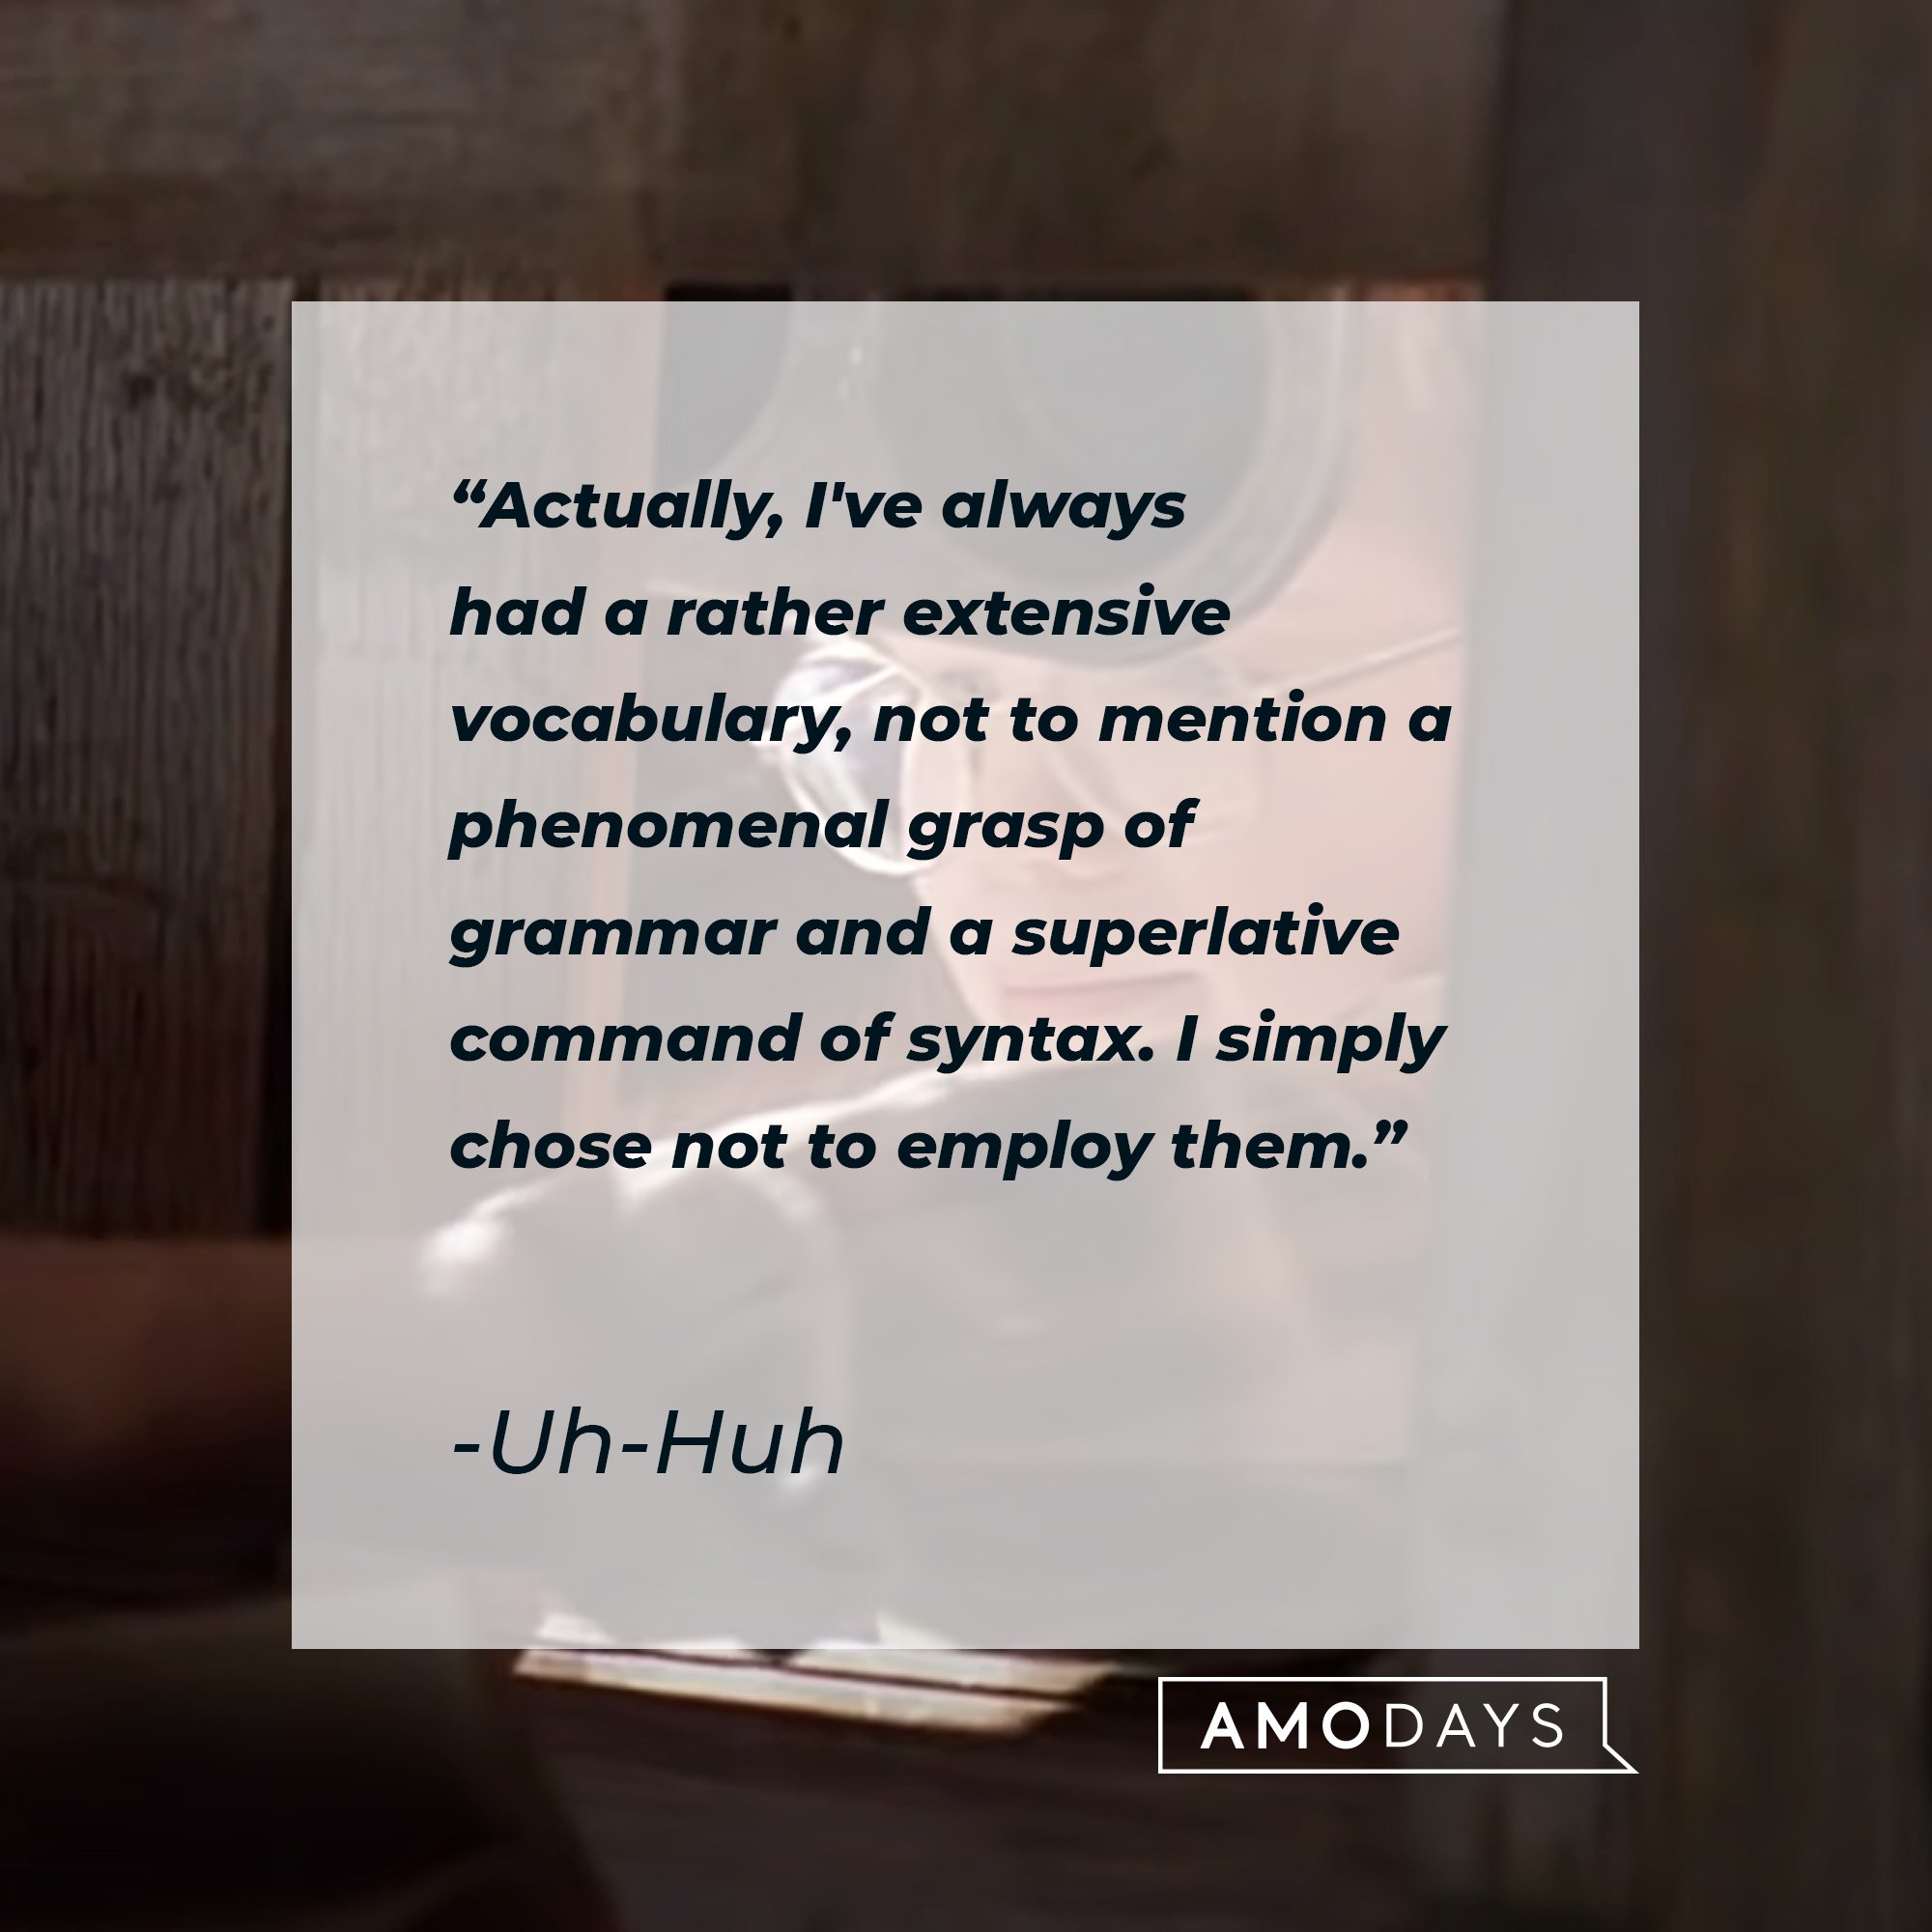 Uh-Huh’s quote: "Actually, I've always had a rather extensive vocabulary, not to mention a phenomenal grasp of grammar and a superlative command of syntax. I simply chose not to employ them." | Image: AmoDays